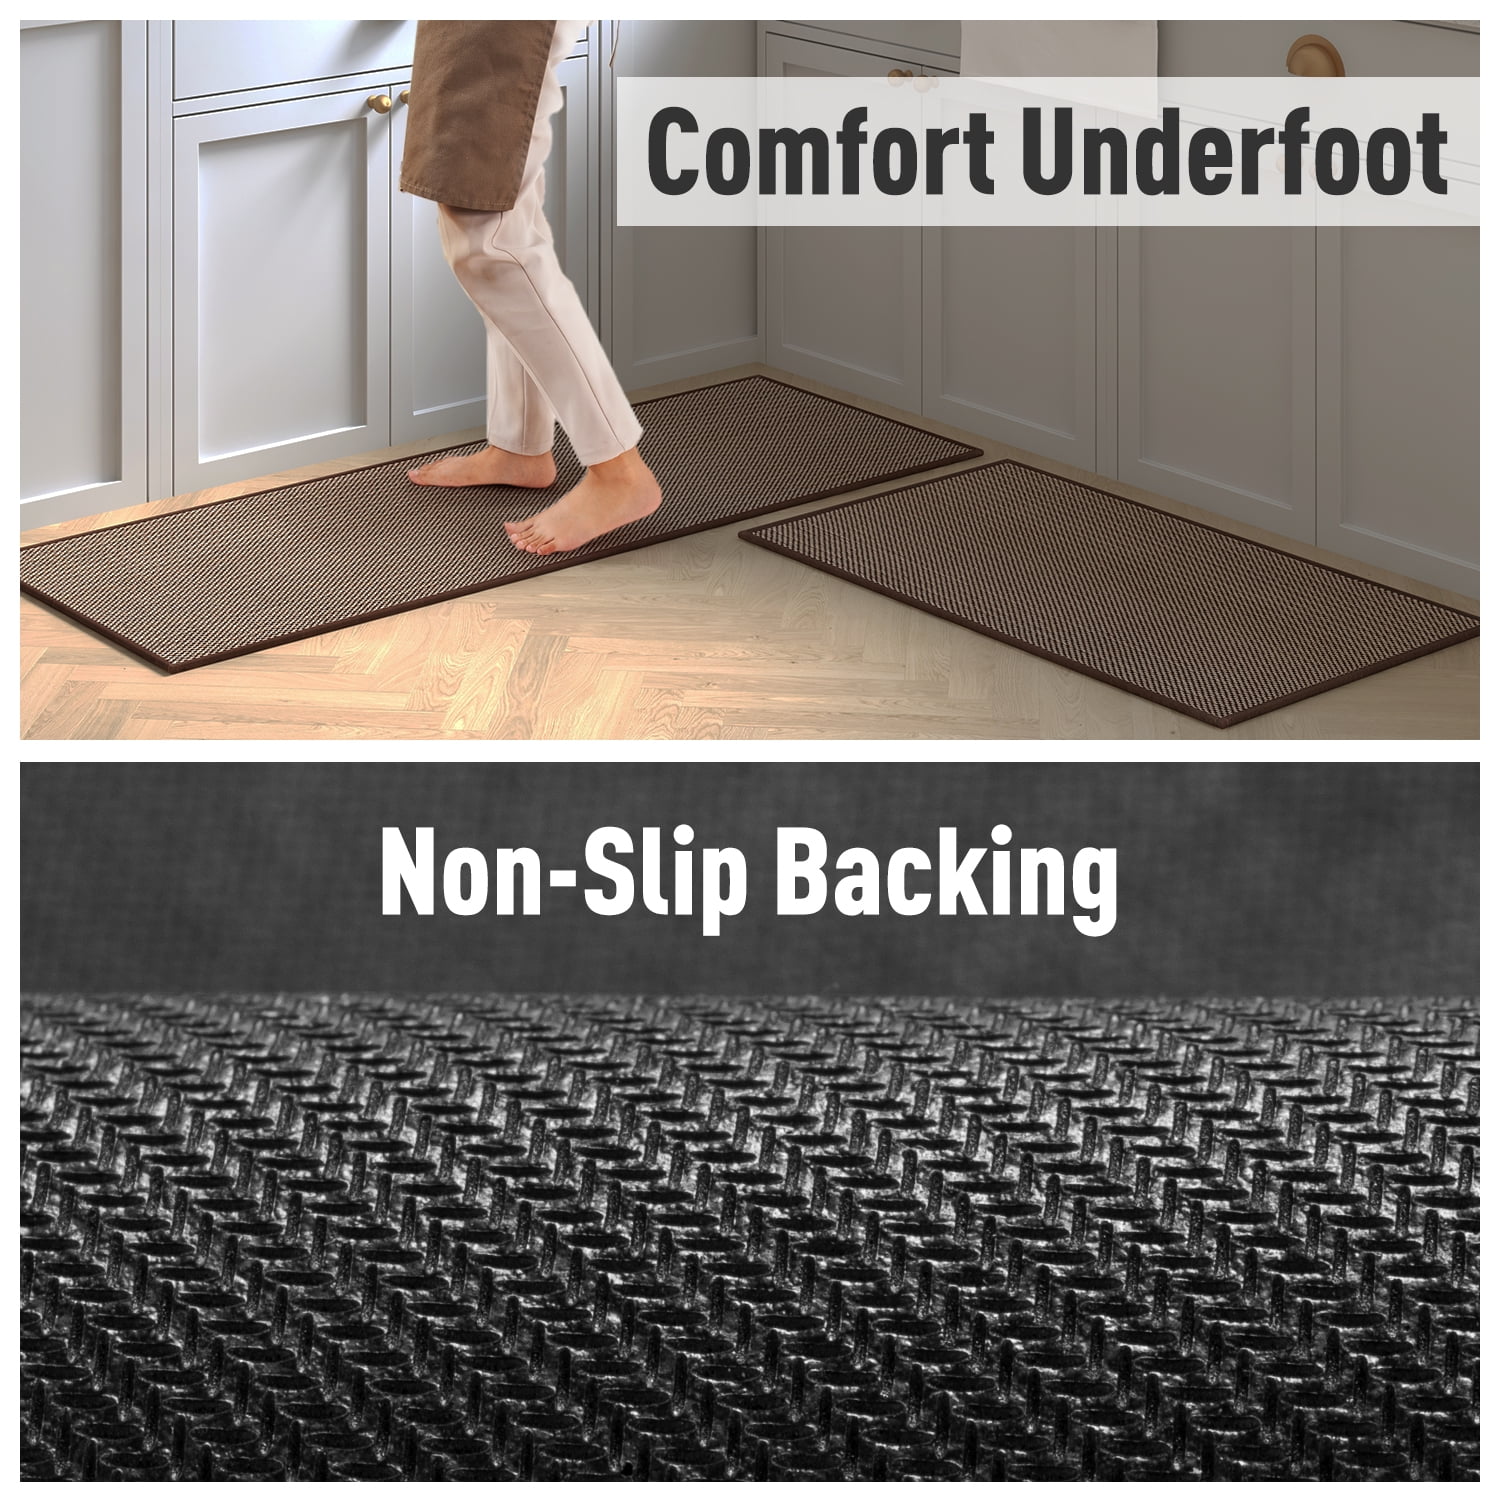 Sanmadrola Kitchen Rugs Cushioned Anti-Fatigue Runner Rug 0.75'' Thick  Waterproof Non-Slip Kitchen Mats Heavy Duty PVC Comfort Foam Rug for Kitchen,  Floor Home, Office, Sink, Laundry 20x60'' Brown 